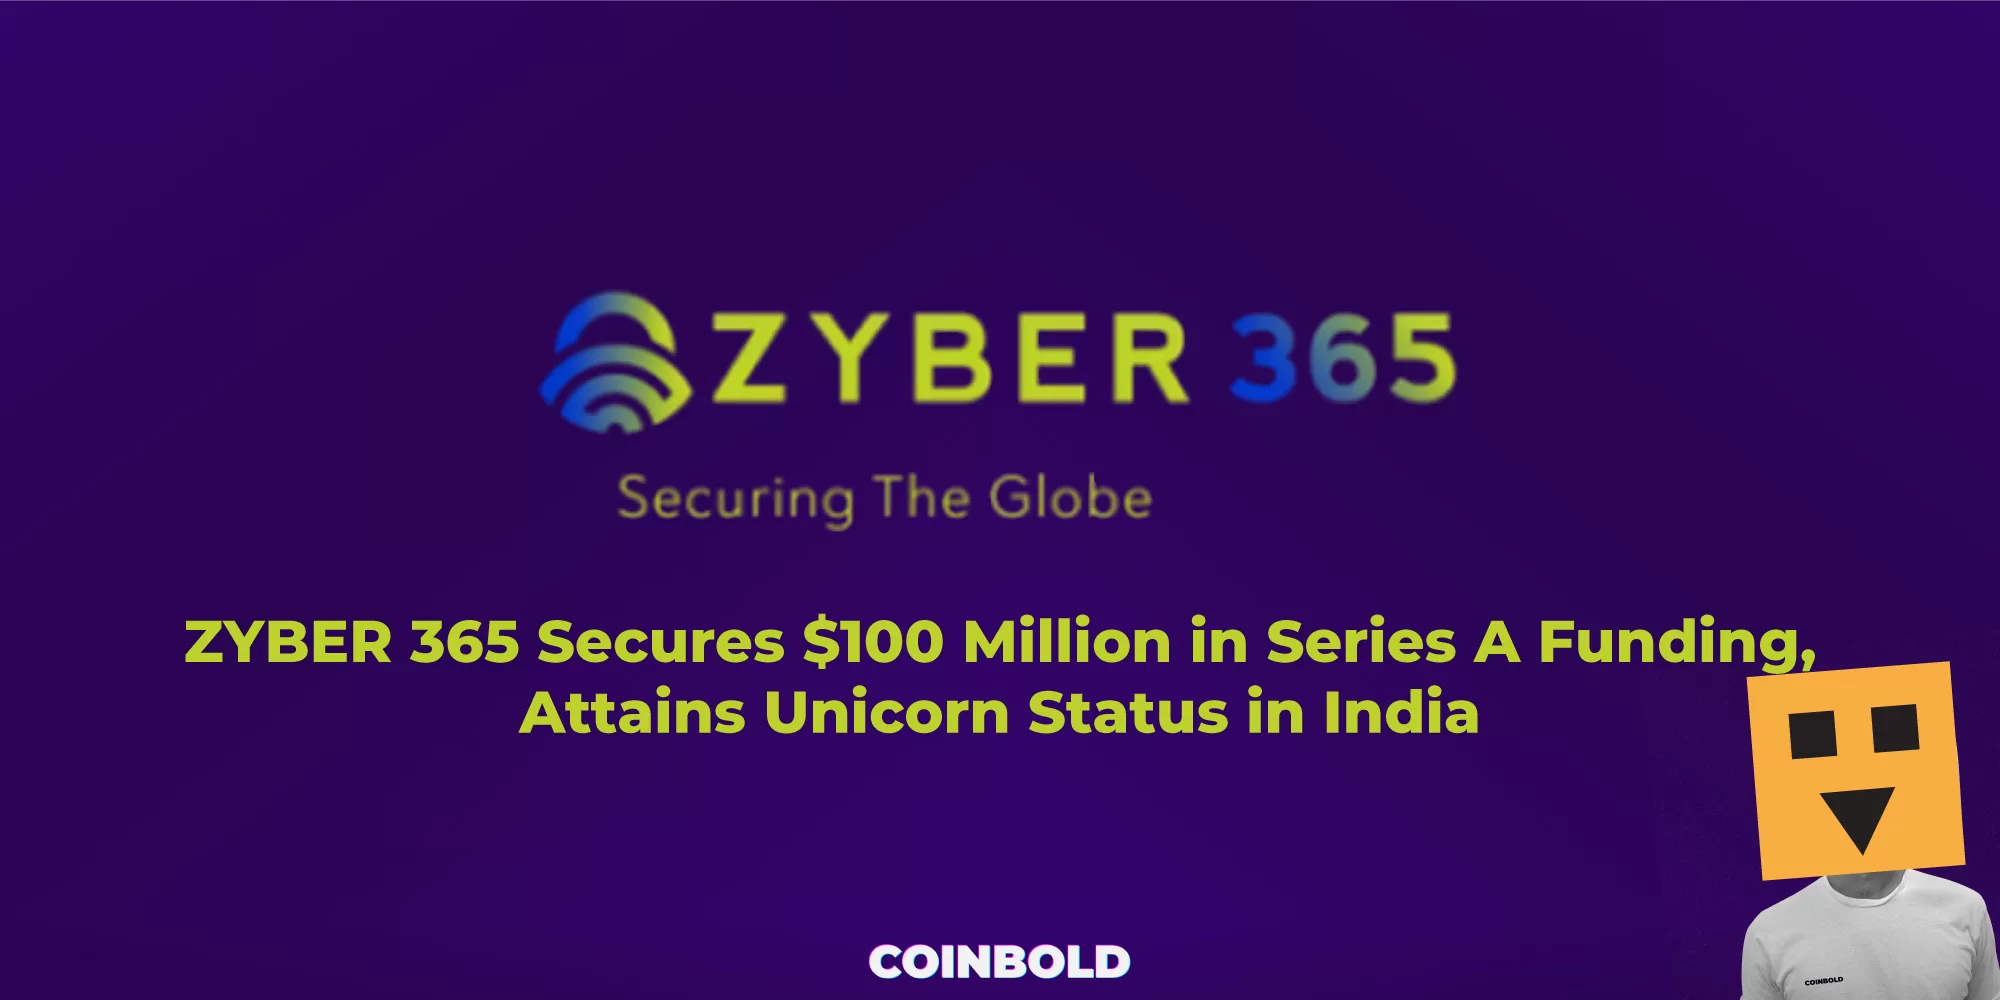 ZYBER 365 Secures $100 Million in Series A Funding, Attains Unicorn Status in India